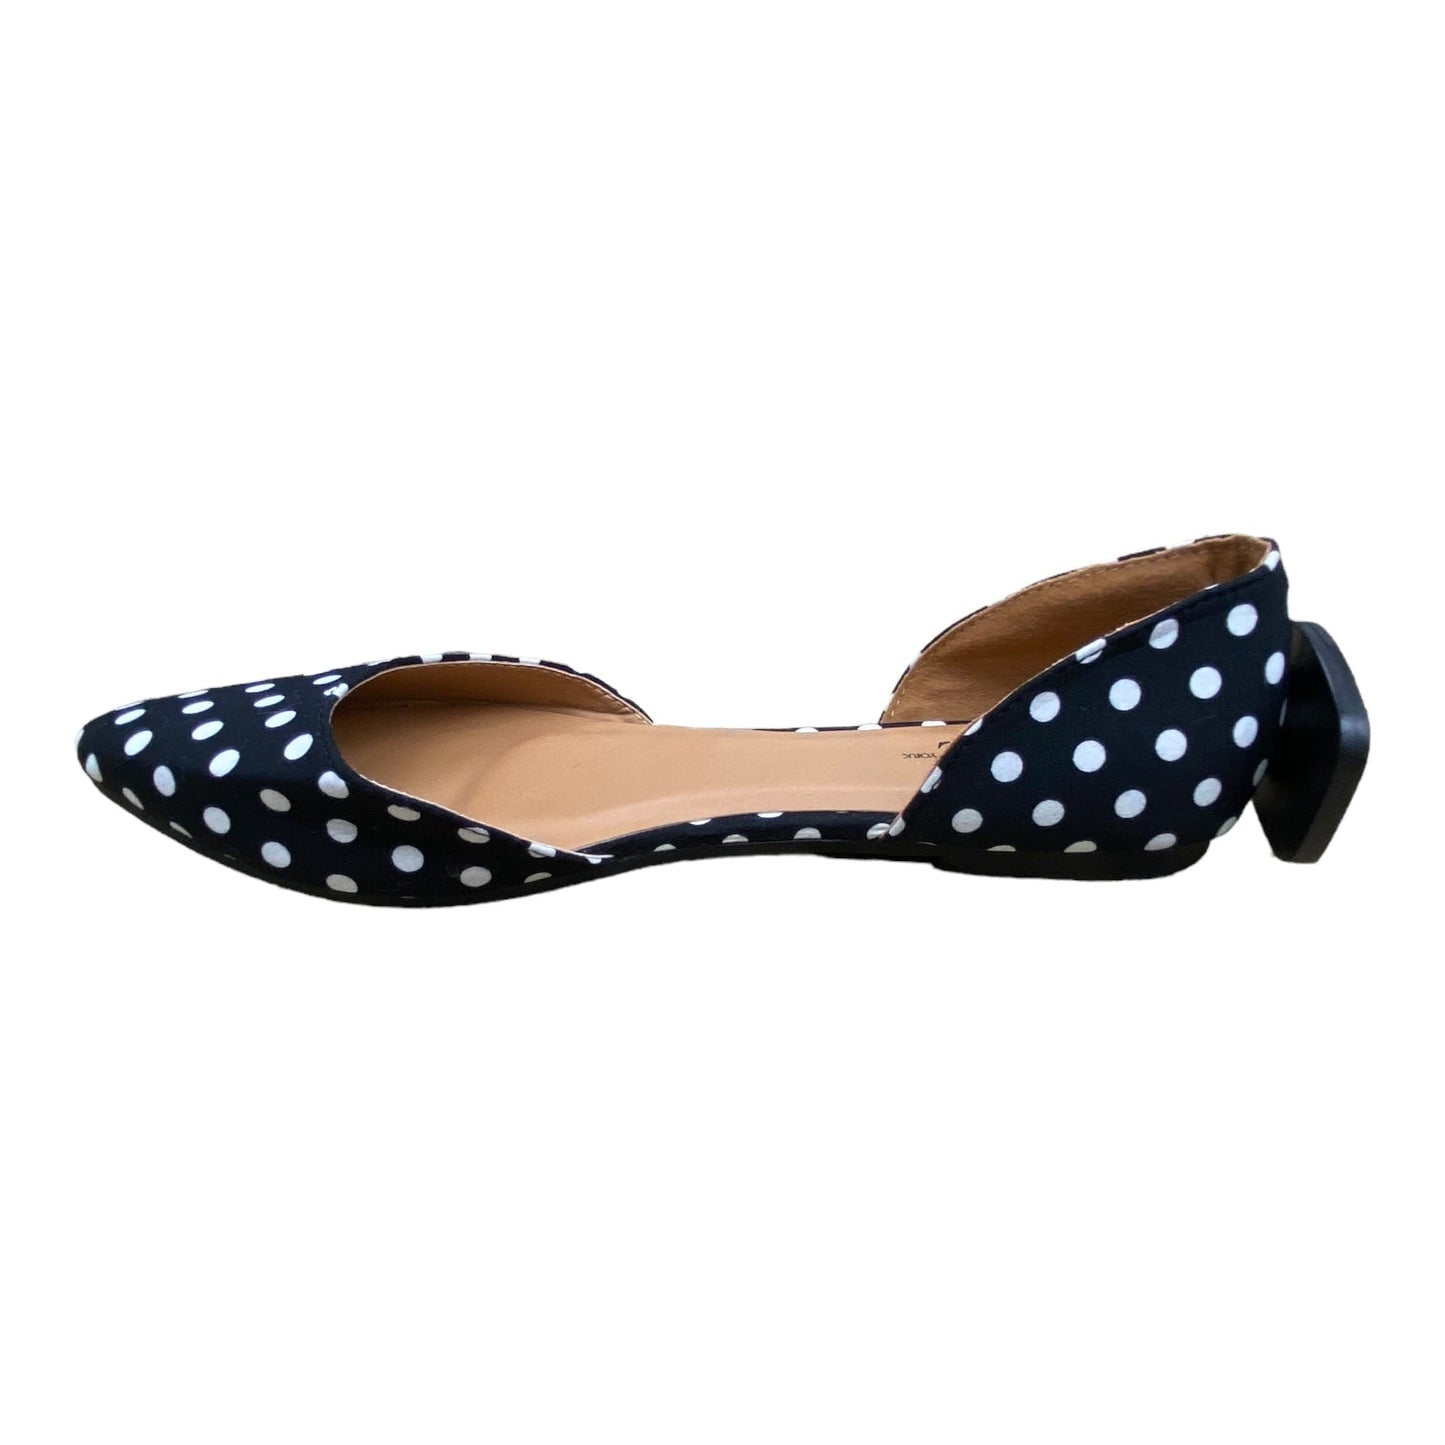 Shoes Flats By Cme  Size: 8.5